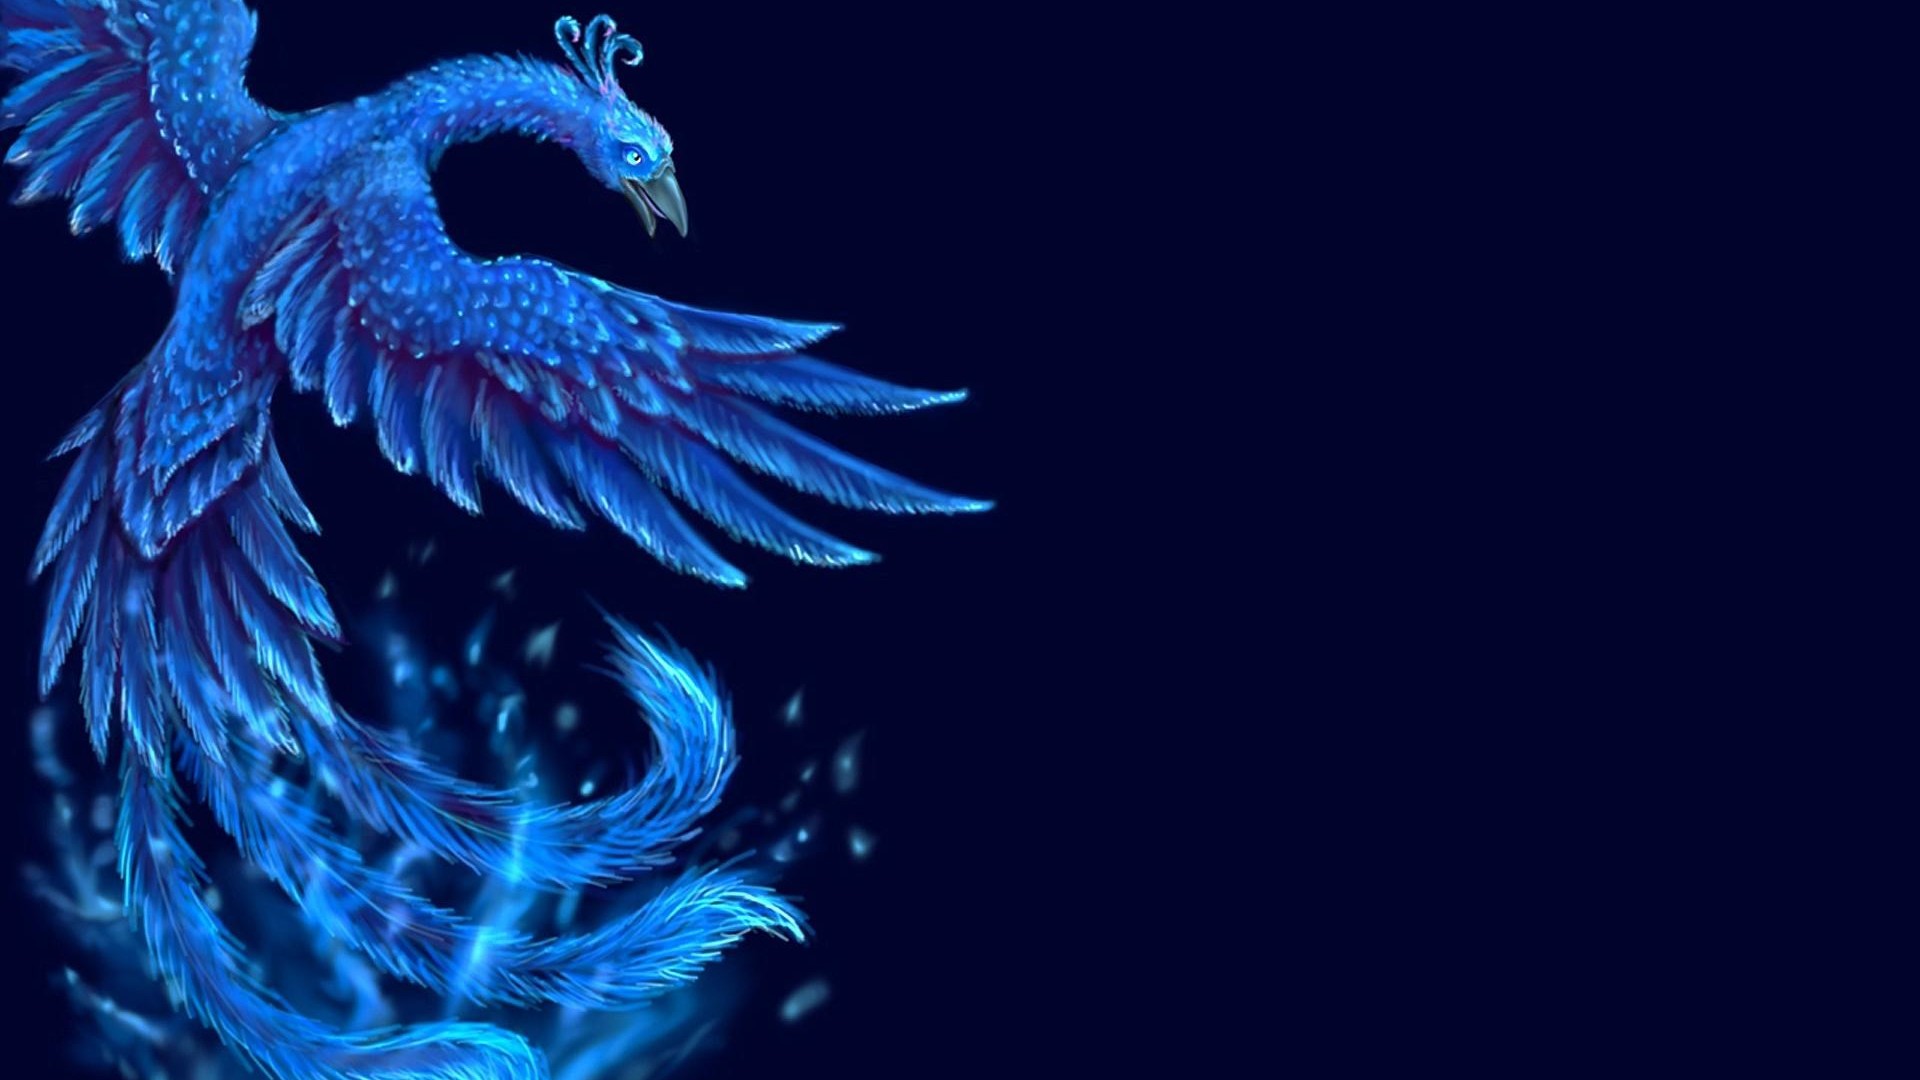 HD Wallpaper Ice Phoenix with image resolution 1920x1080 pixel. You can make this wallpaper for your Desktop Computer Backgrounds, Mac Wallpapers, Android Lock screen or iPhone Screensavers